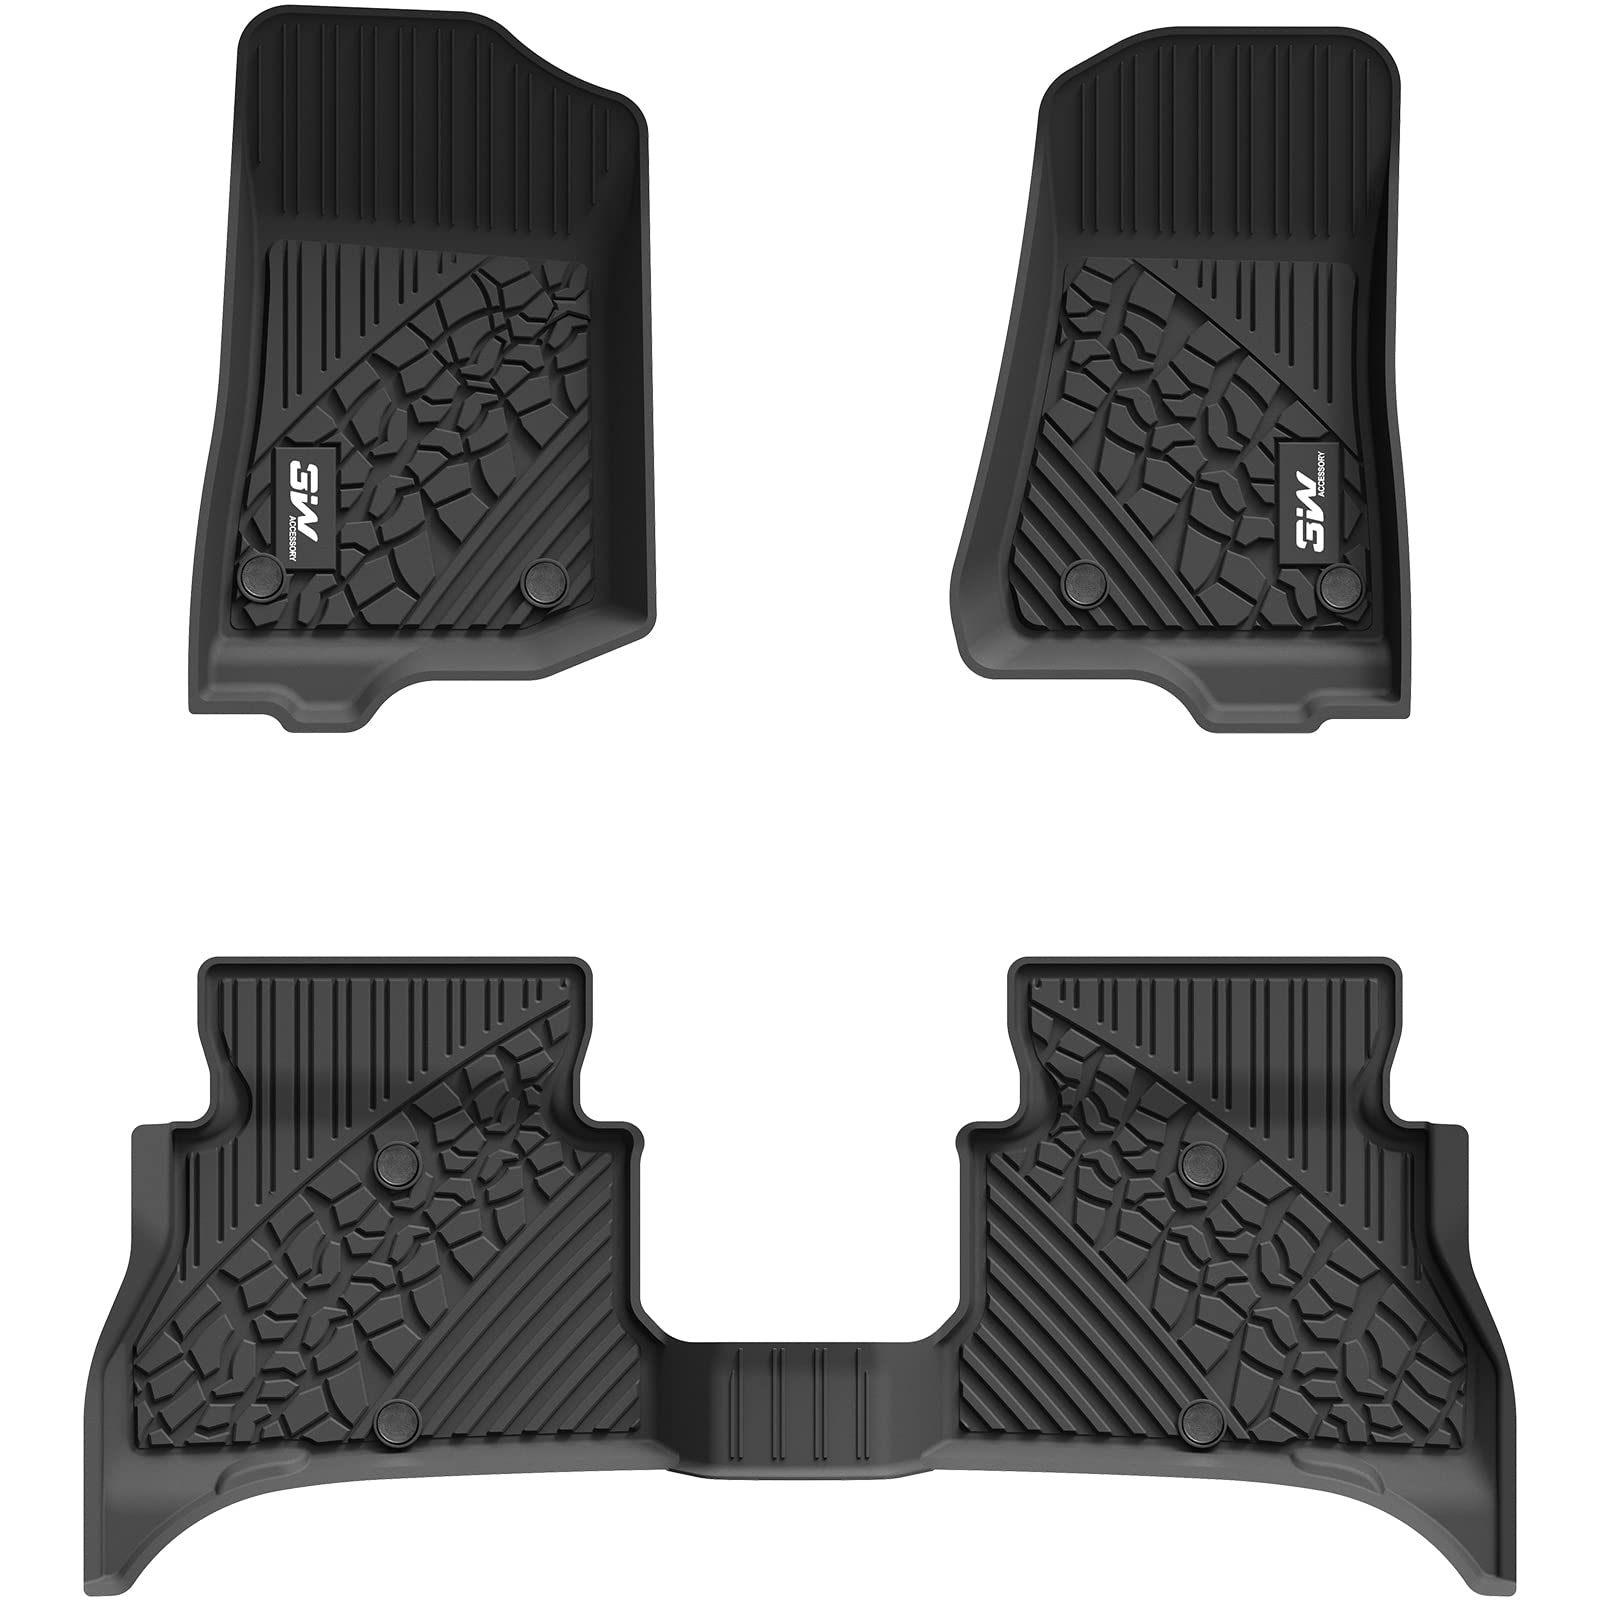 3W Jeep Wrangler 4XE 2021-2024 Hybrid 4 Door (Non JL or JK) Custom Floor Mats TPE Material & All-Weather Protection Vehicles & Parts 3Wliners 2021-2024 Wrangler 4XE 2021-2024 1st&2nd Row Mats with White Logo